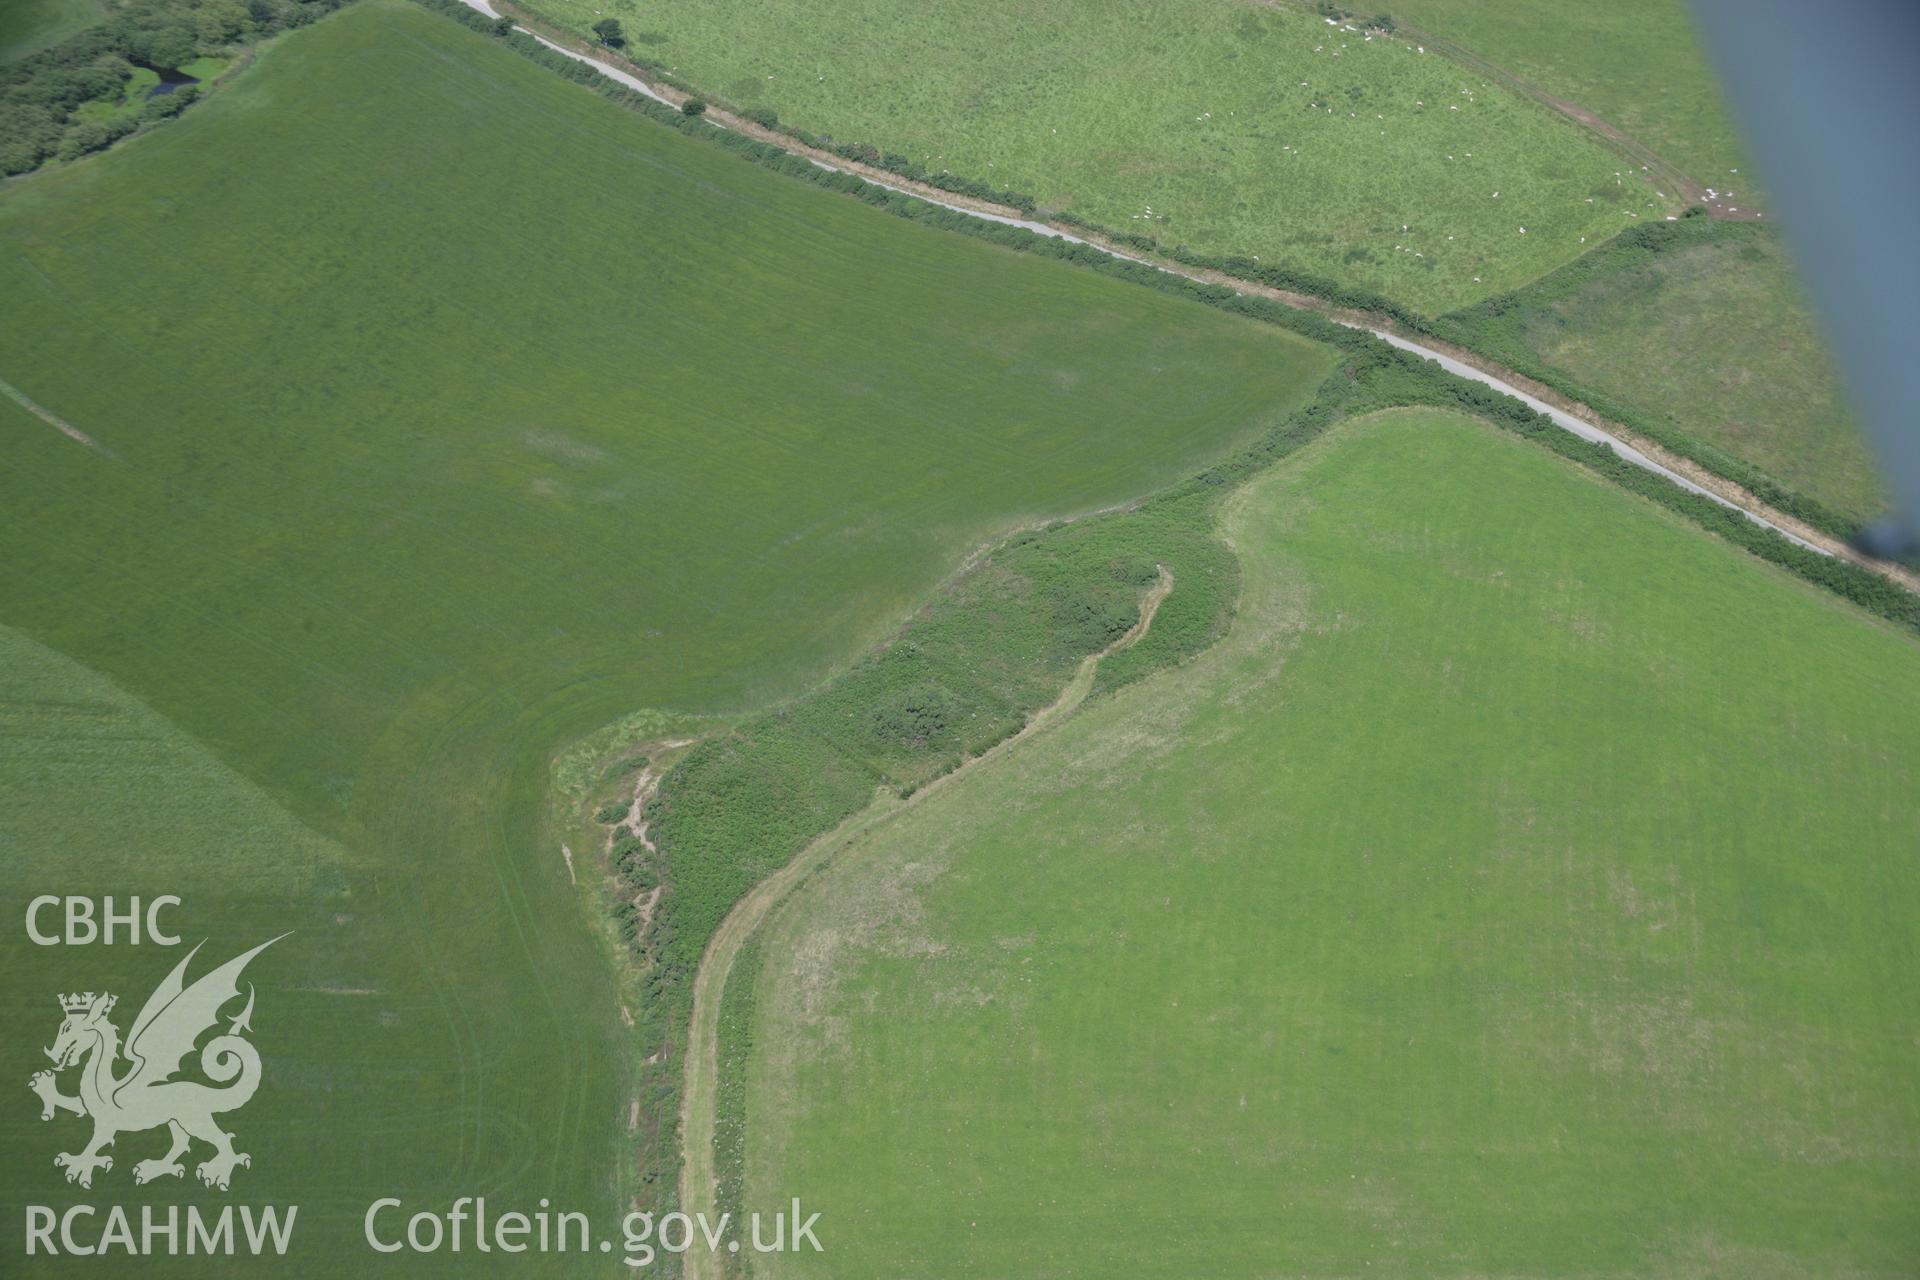 RCAHMW colour oblique aerial photograph of Crugiau Cemaes Round Barrow Cemetery, viewed from the south-west. Taken on 11 July 2005 by Toby Driver